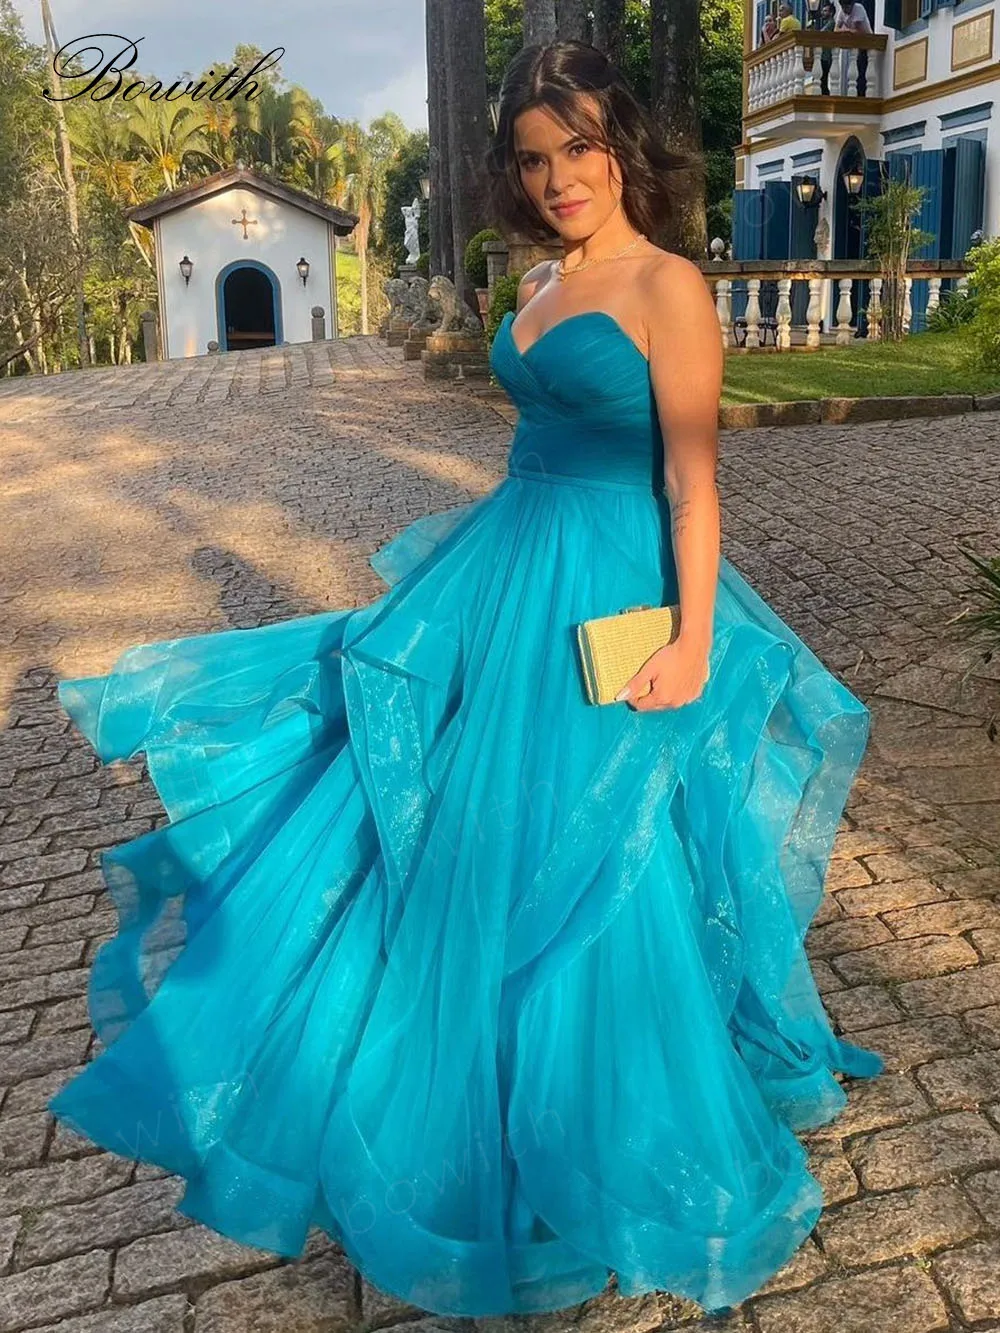 

Bowith Puffy Evening Dresses for Women A Line Prom Dresses Formal Party Gown with Tiered Layers vestidos de gala